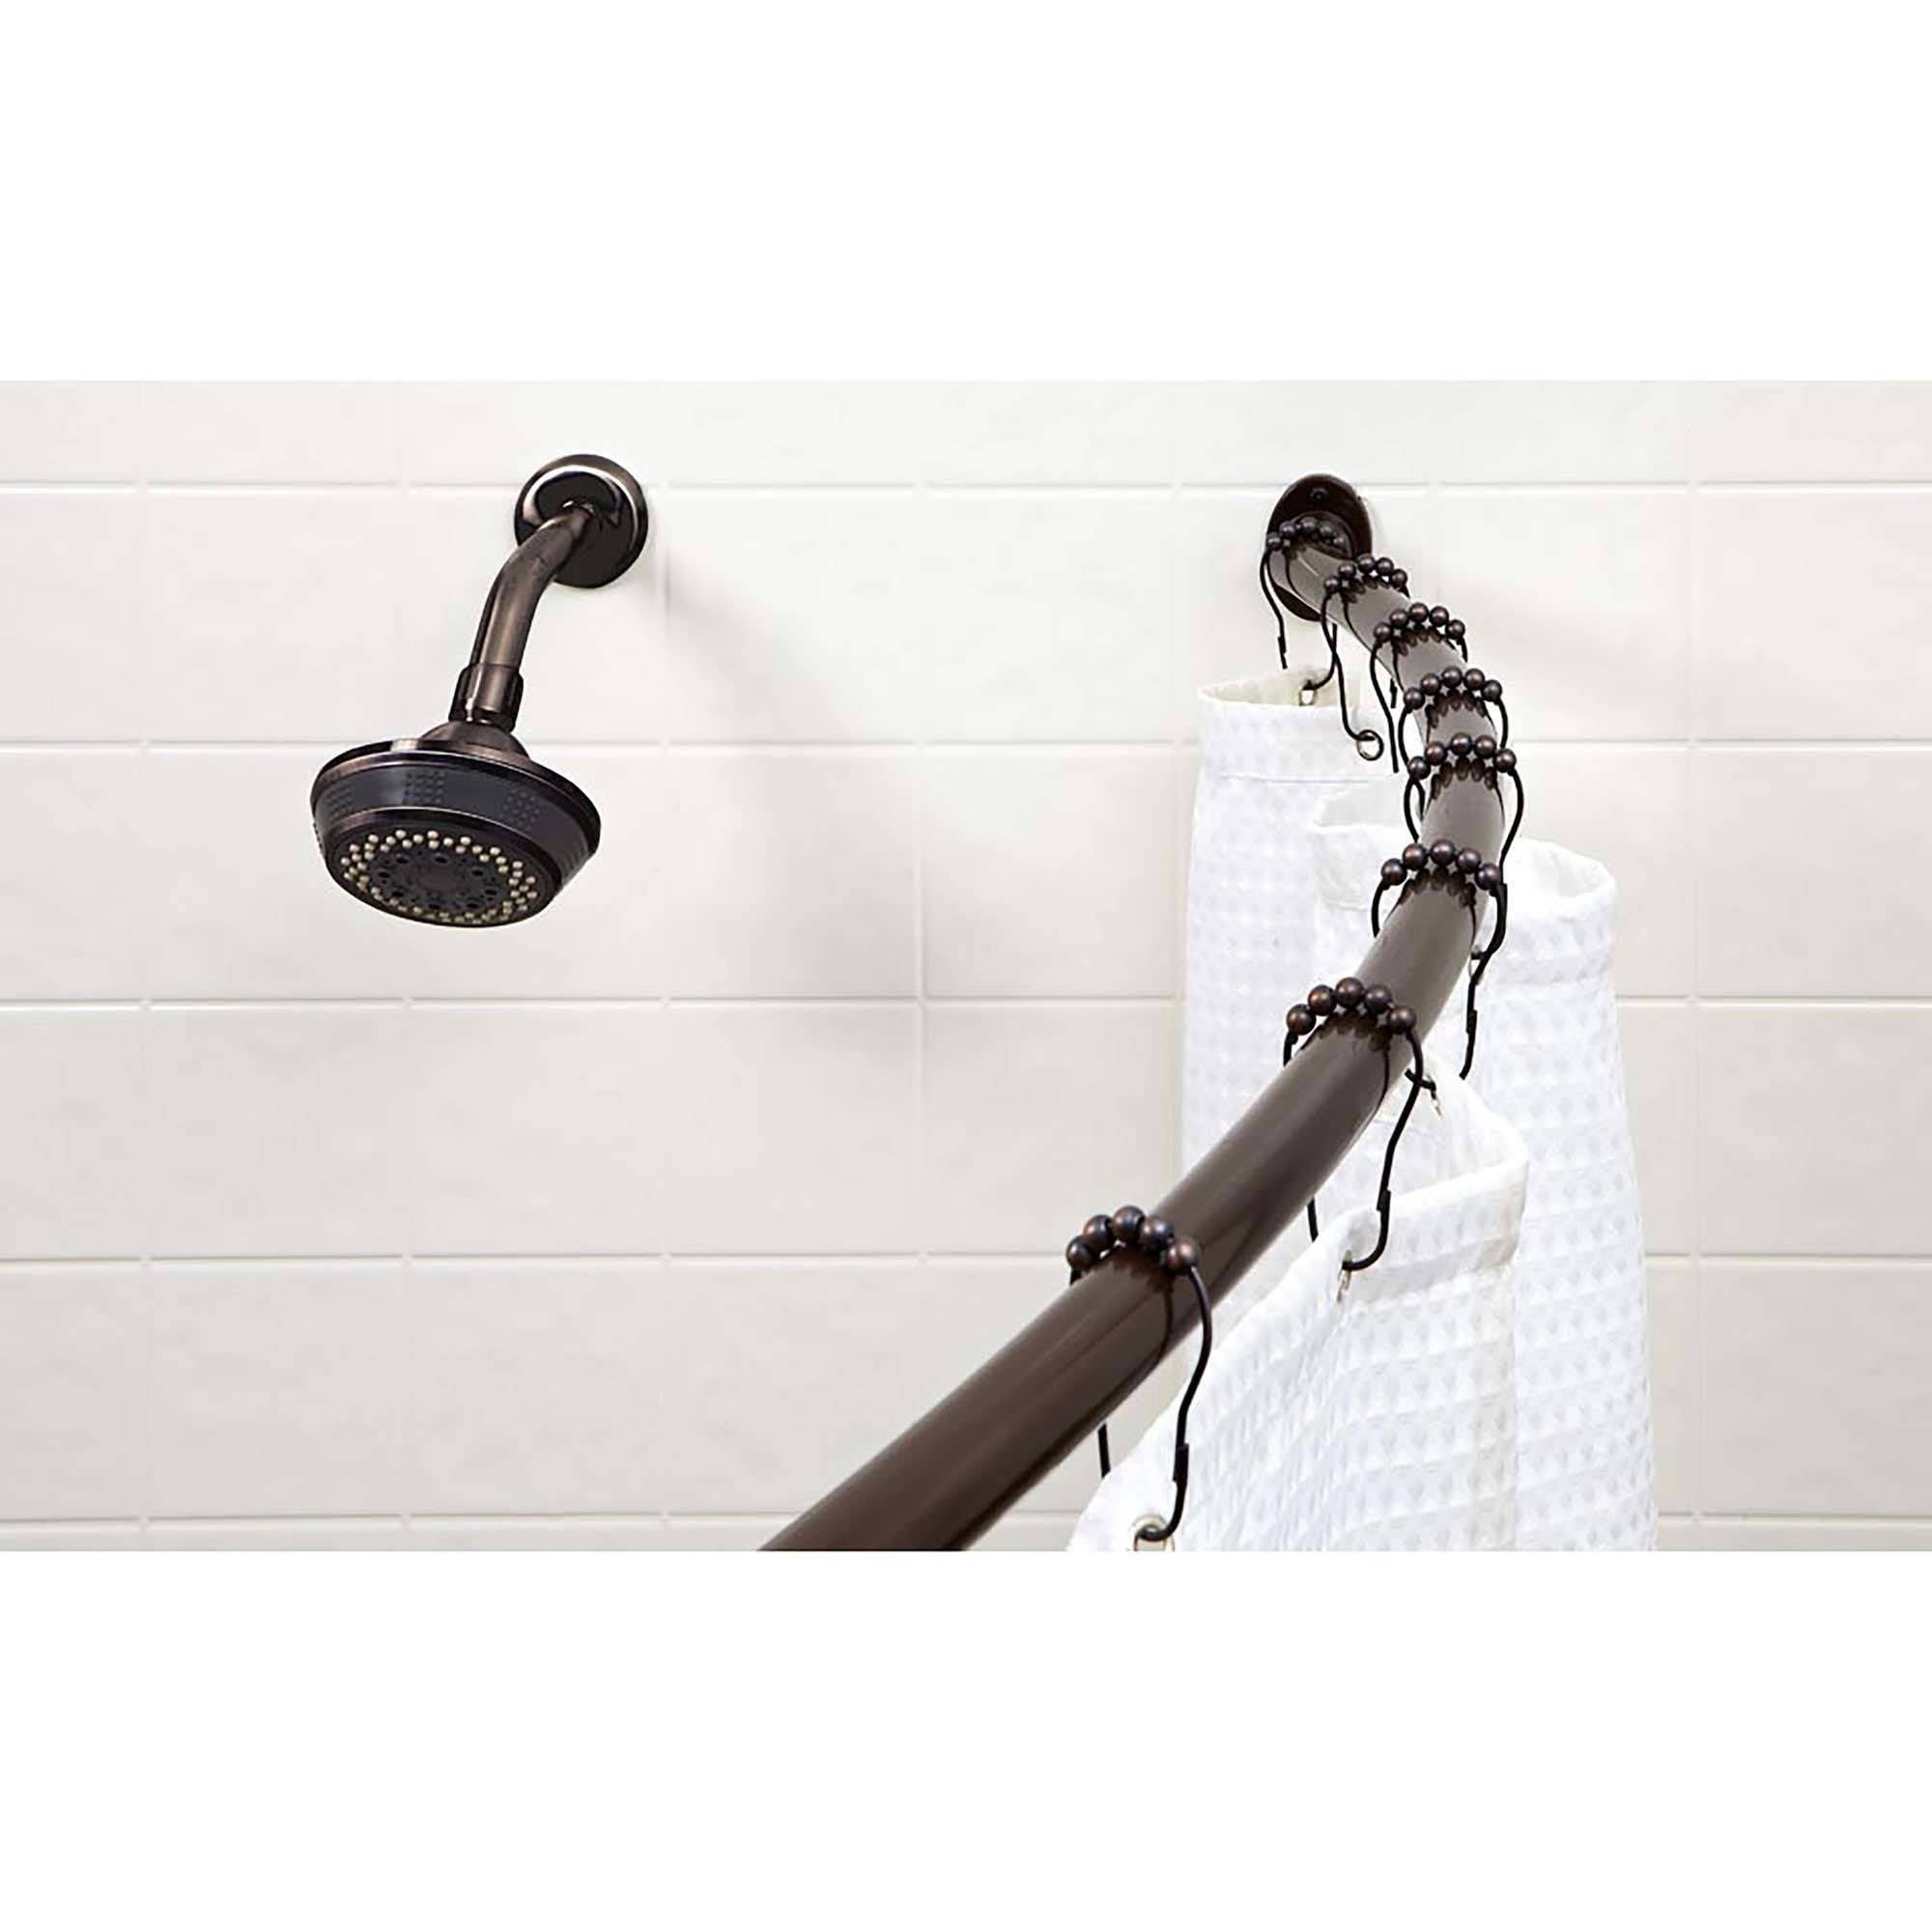 Bath Bliss Wall Mountable Curved, Oil Rubbed Bronze Shower Curtain Rod Adjustable